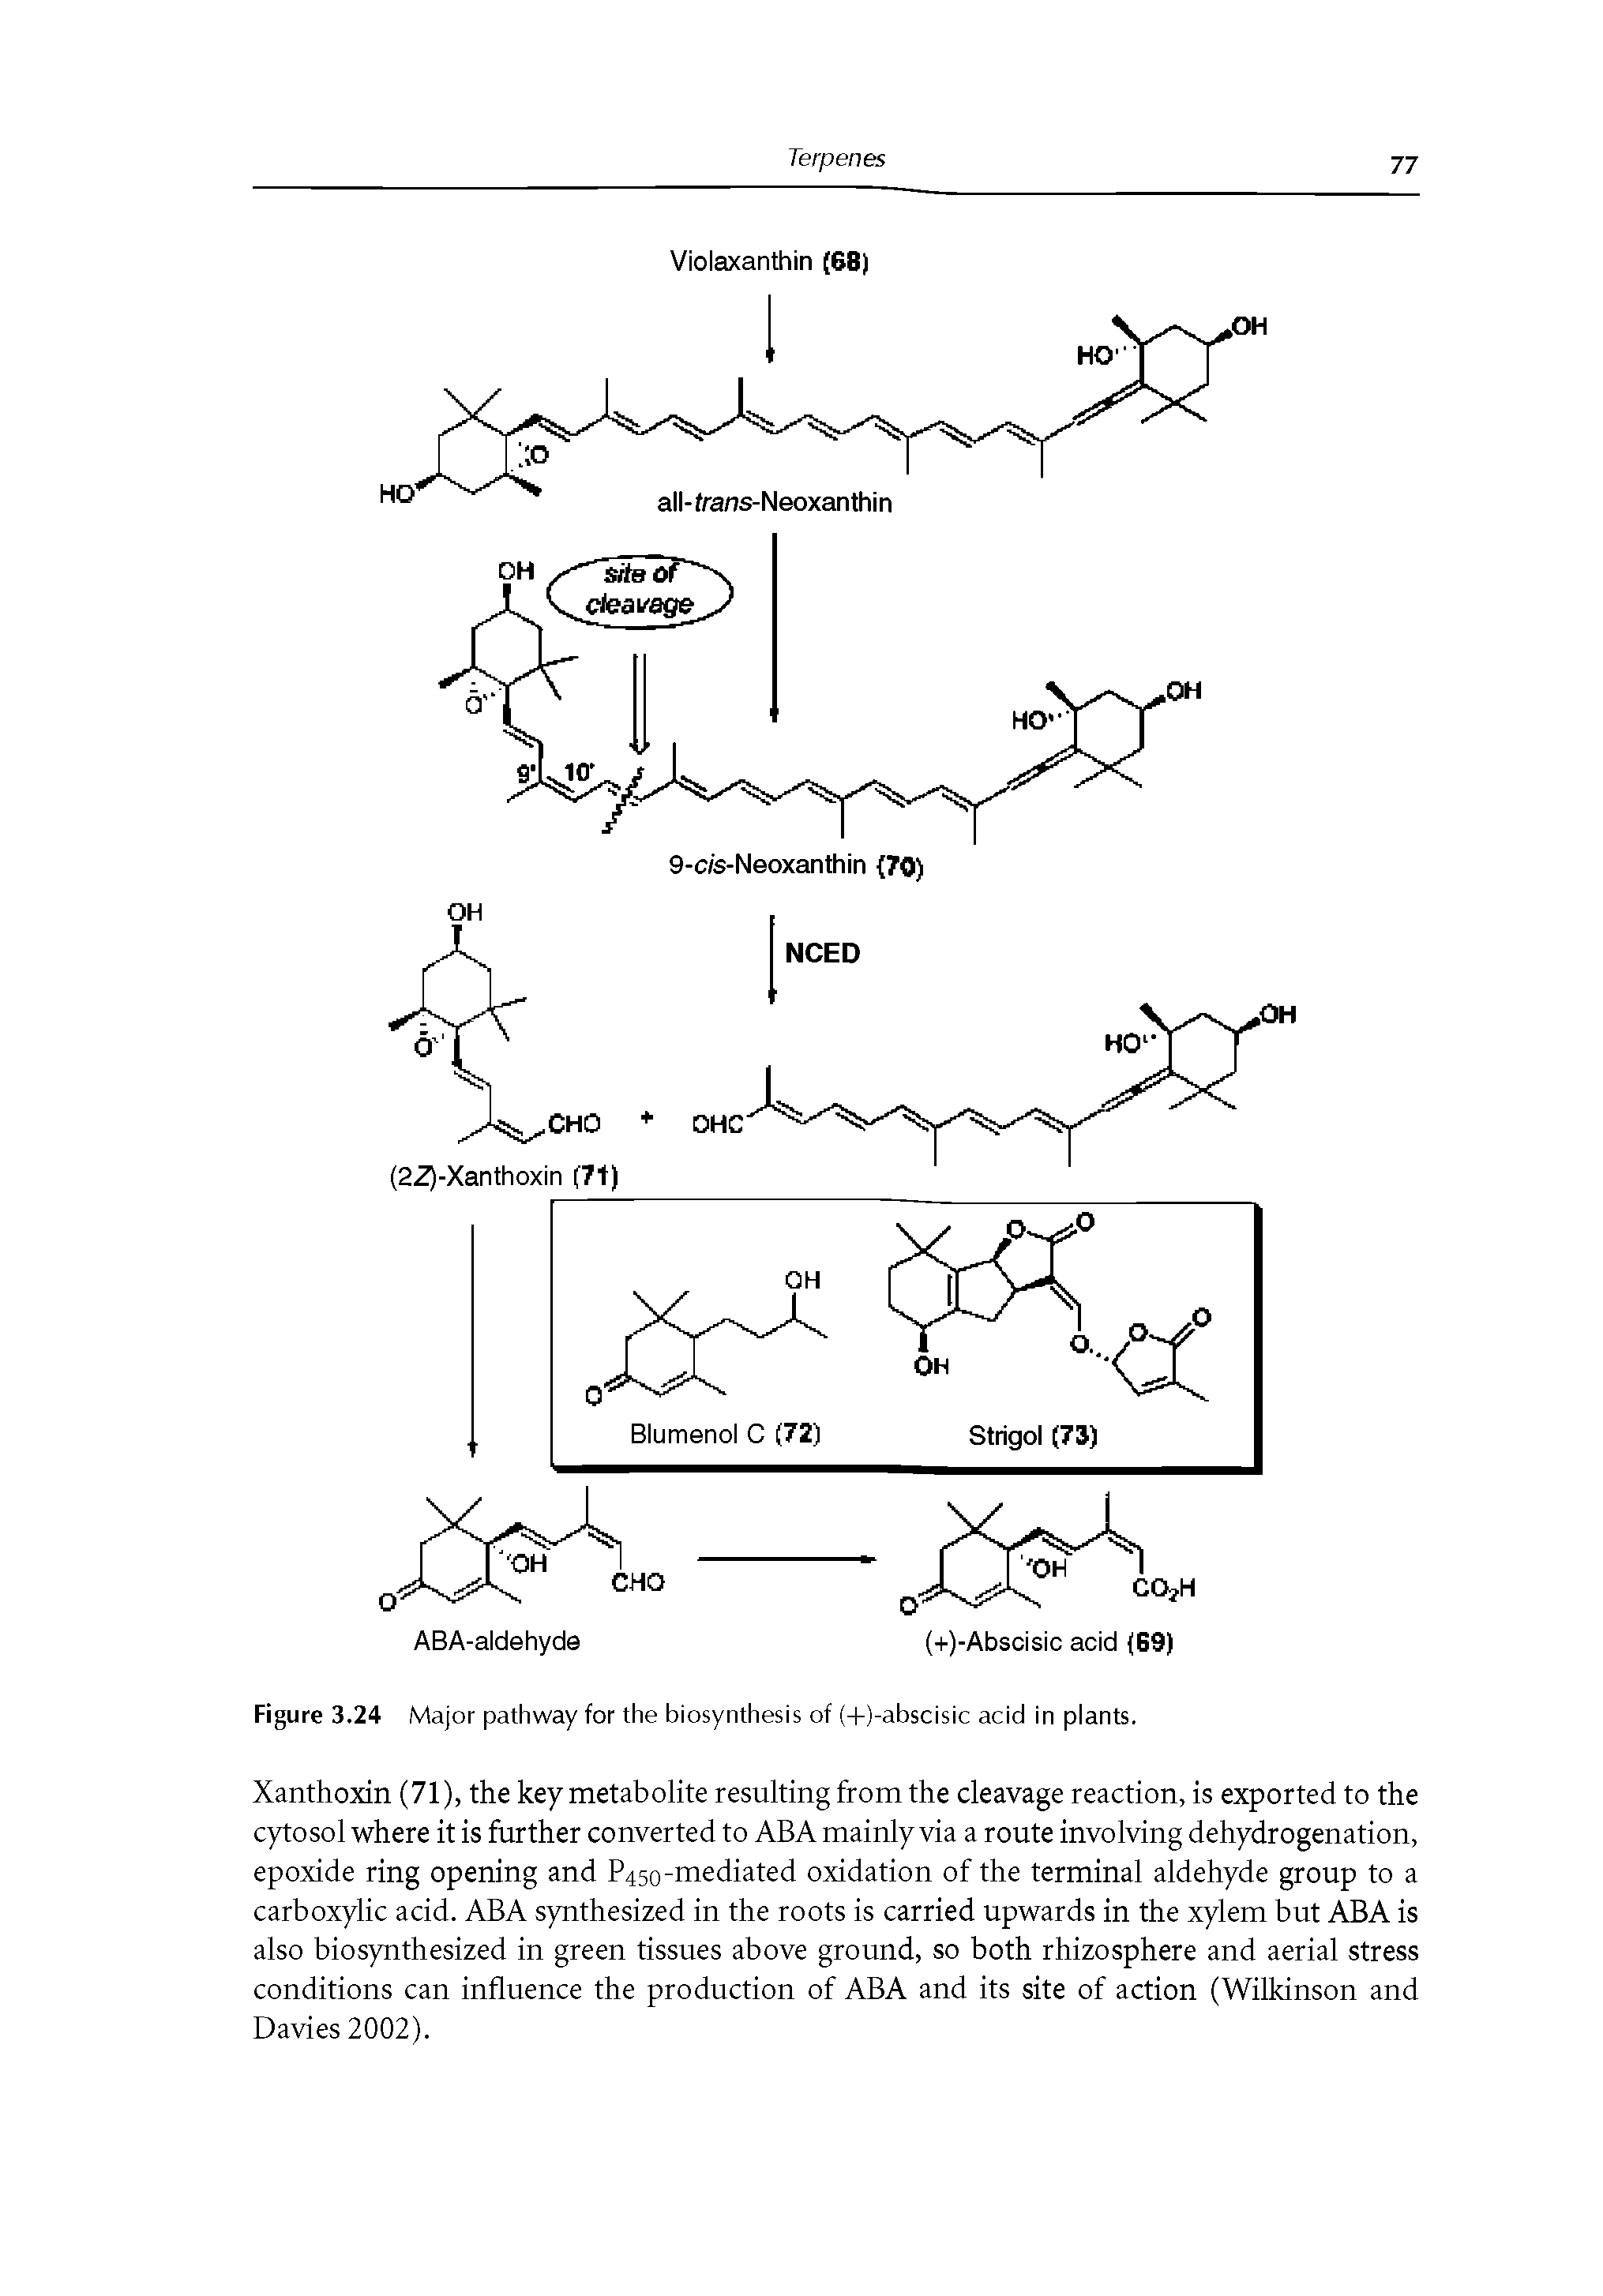 Figure 3.24 Major pathway for the biosynthesis of (+)-abscisic acid in plants.